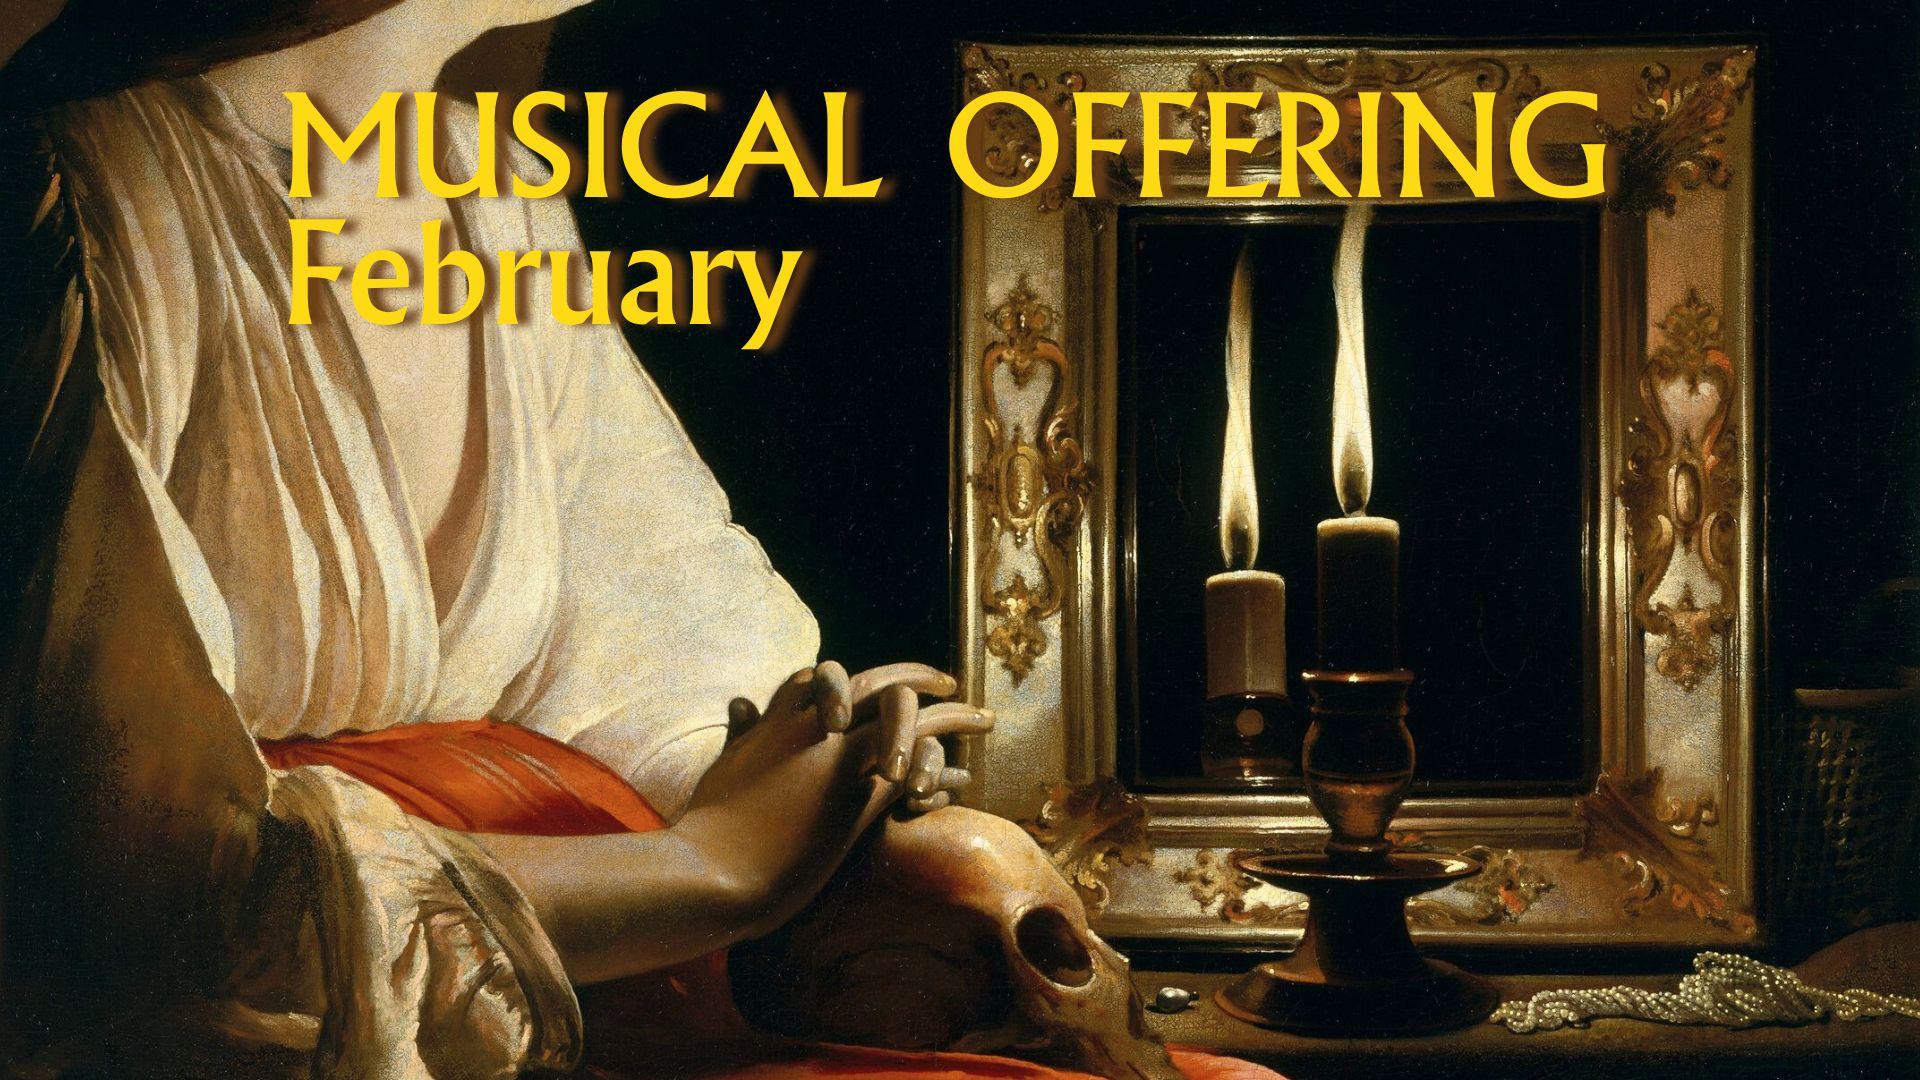 Musical Offering February Concert ~ Live Broadcast